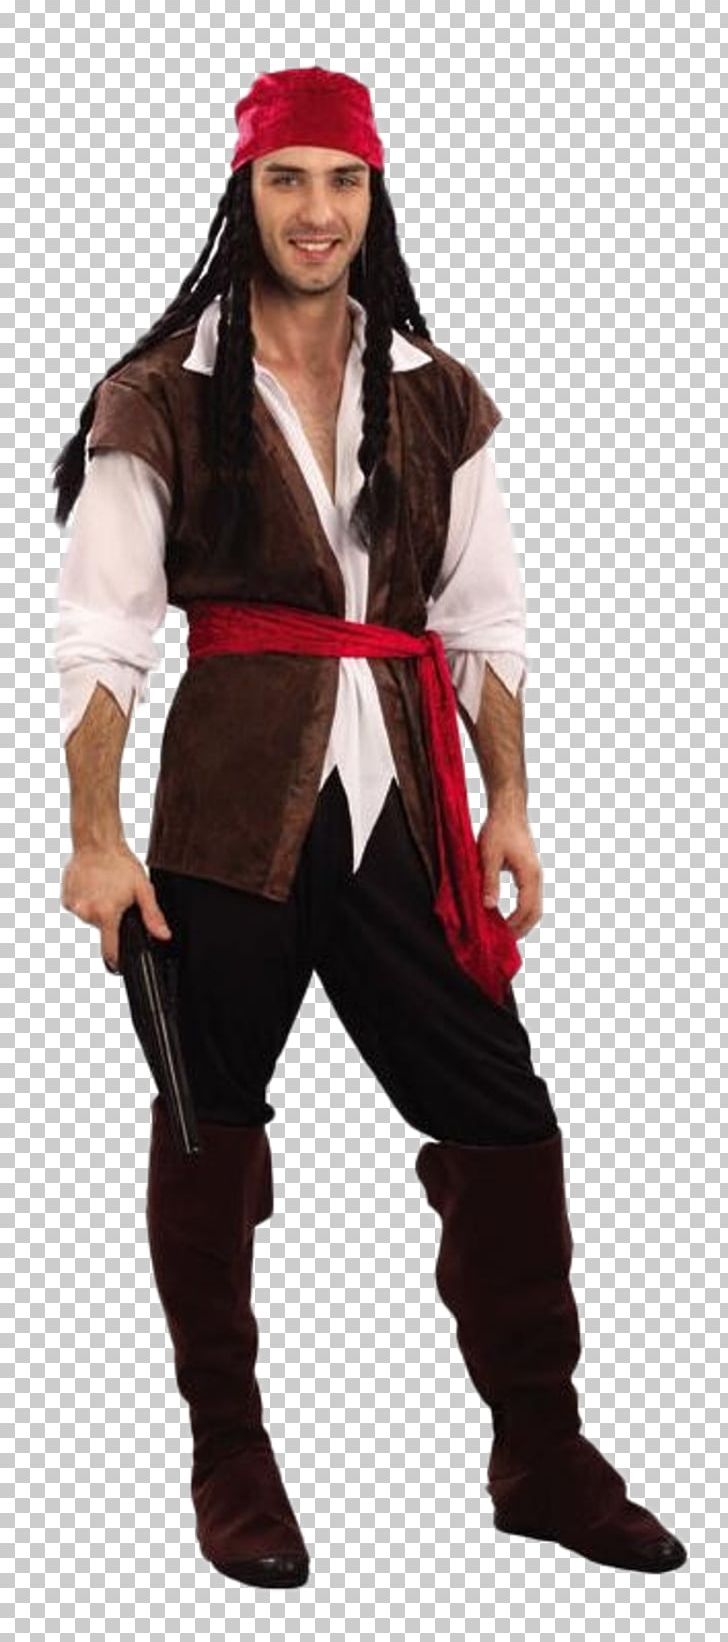 Costume Party Jack Sparrow Piracy Clothing PNG, Clipart, Adult, Boy, Clothing, Clothing Accessories, Clothing Sizes Free PNG Download